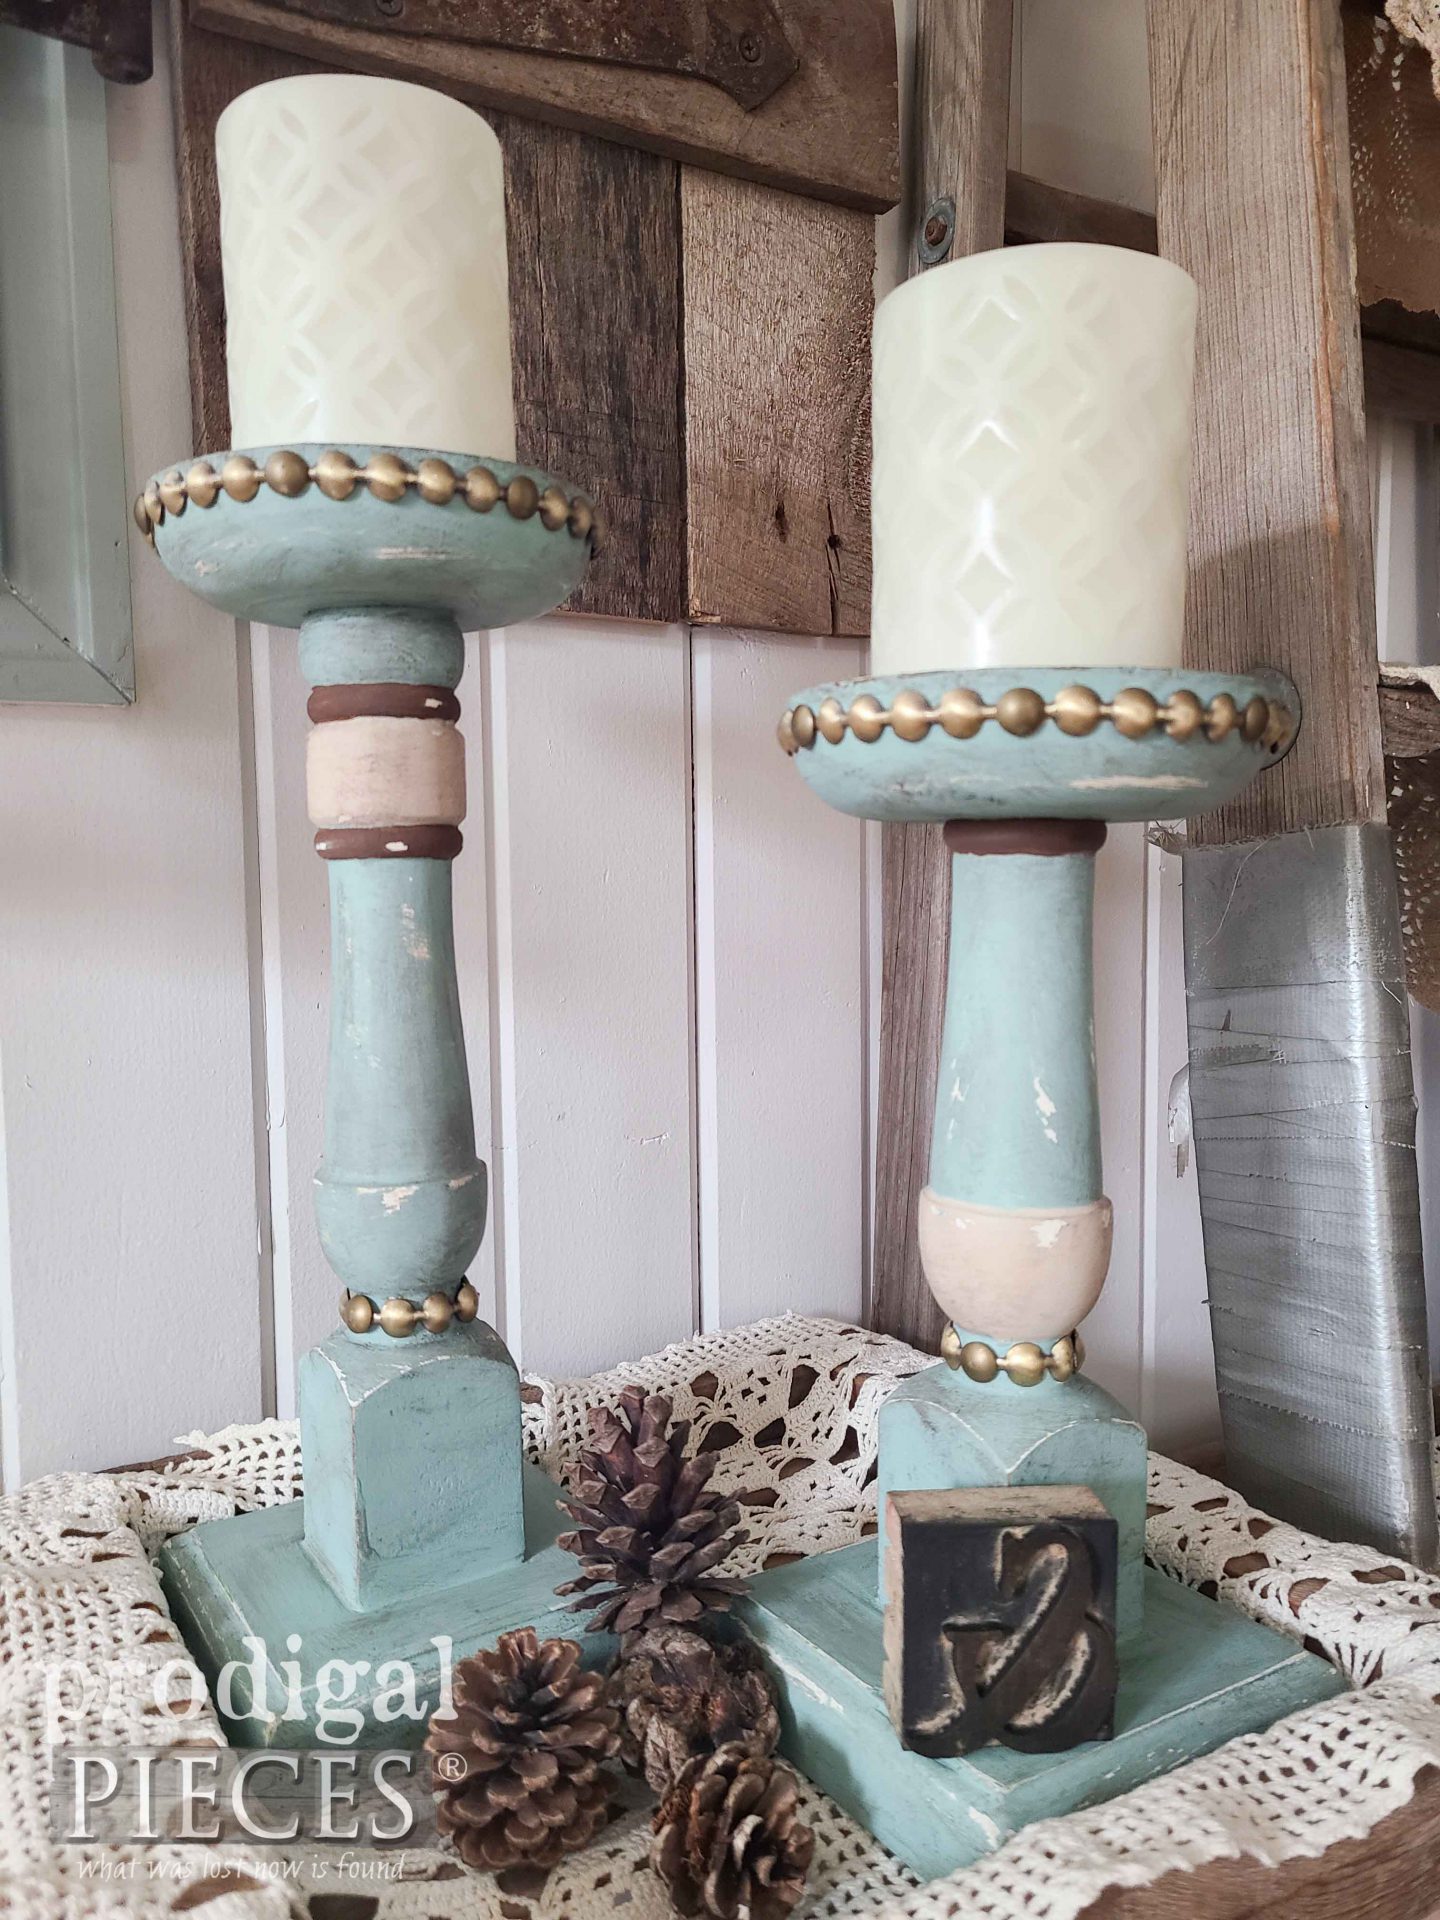 Upcycled Candle Holder with Nail-Head Trim by Larissa of Prodigal Pieces | prodigalpieces.com #prodigalpieces #farmhouse #upcycled